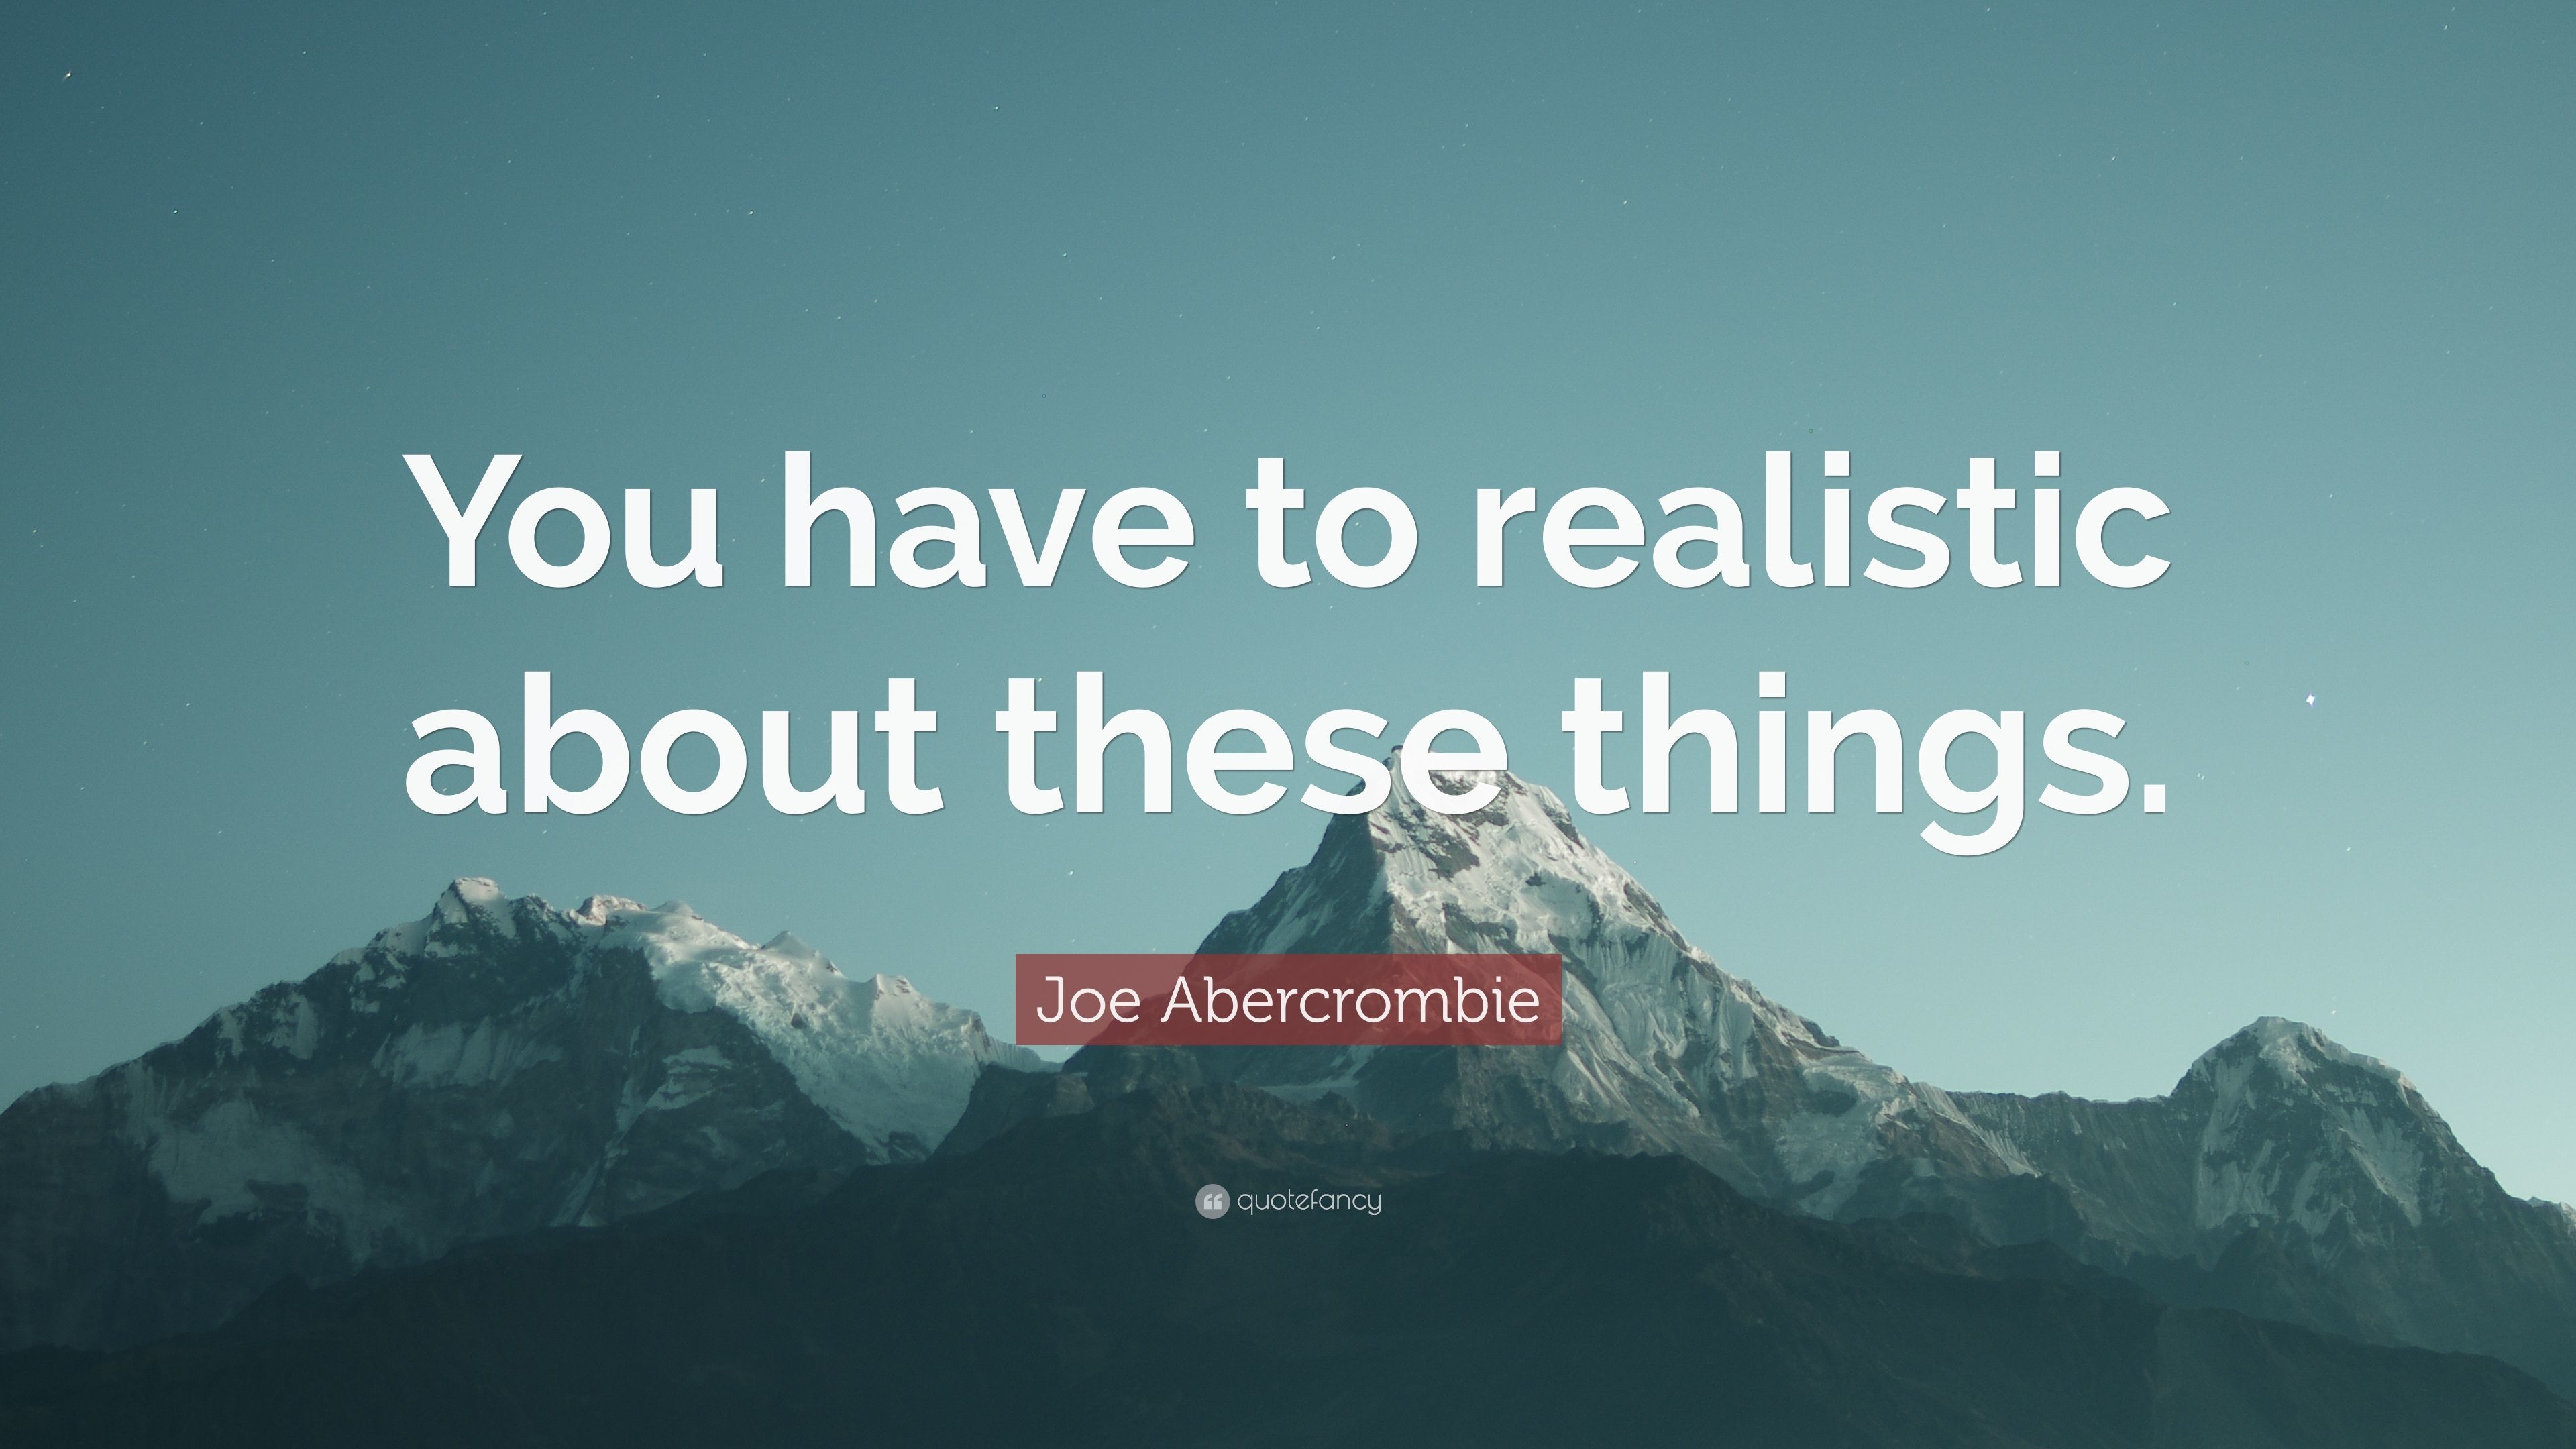 3840x2160 Joe Abercrombie Quote: “You have to realistic about these things.”